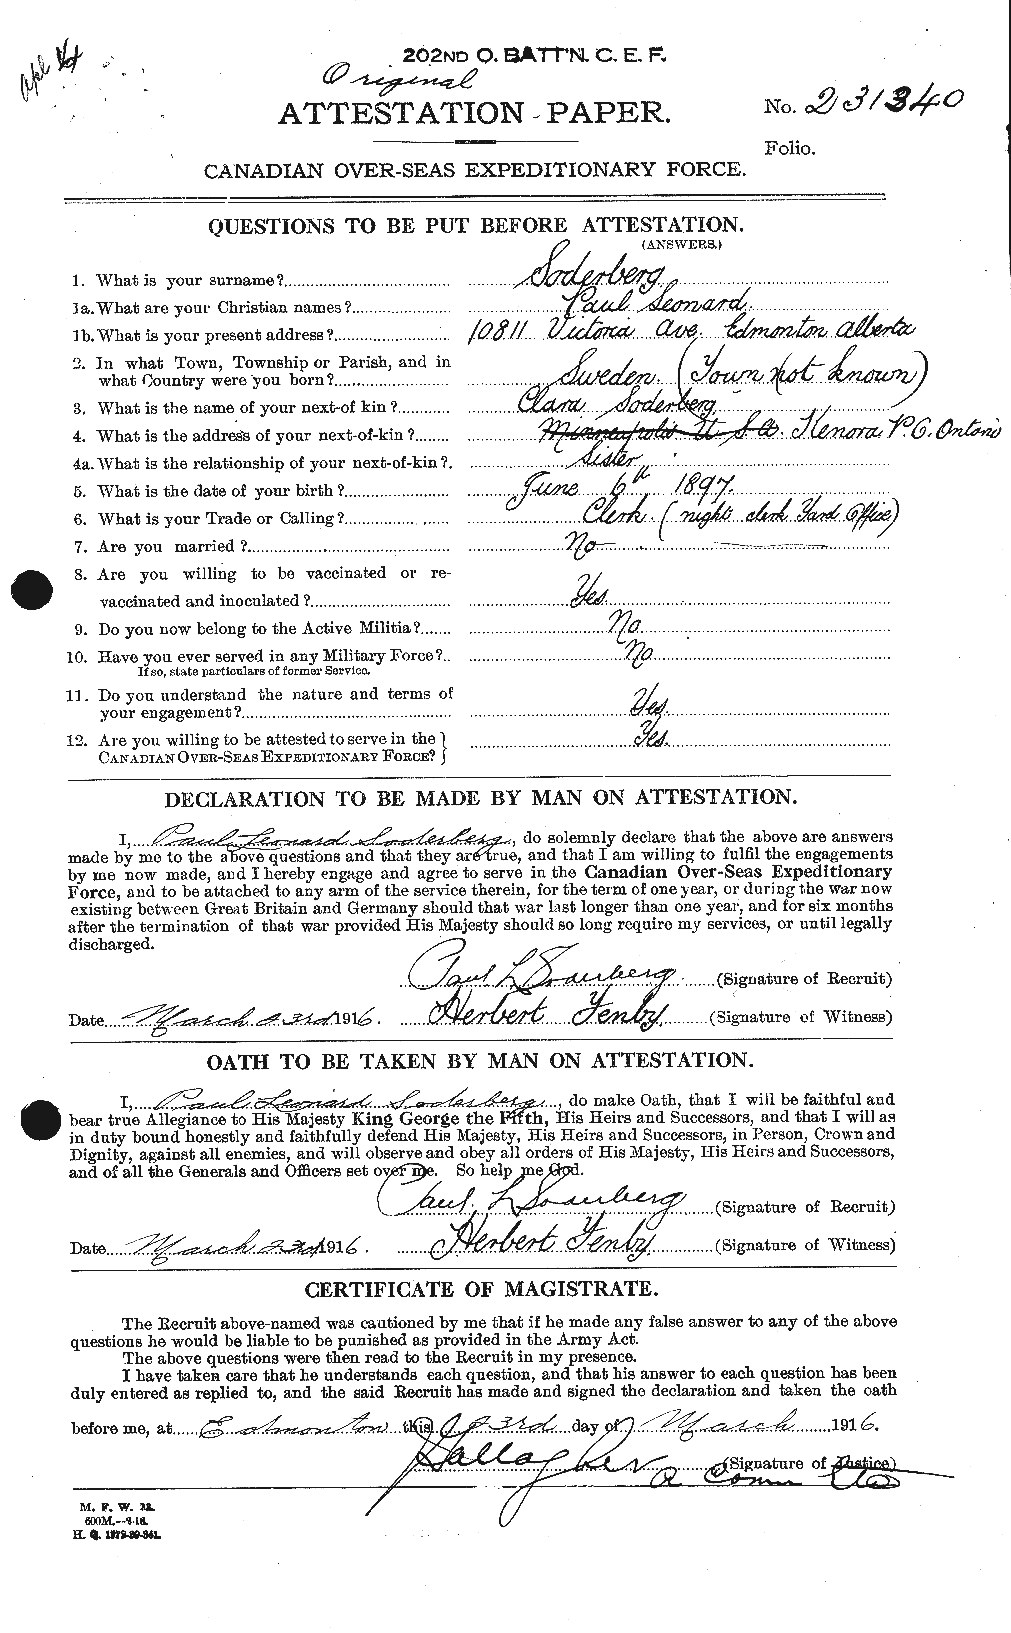 Personnel Records of the First World War - CEF 108339a